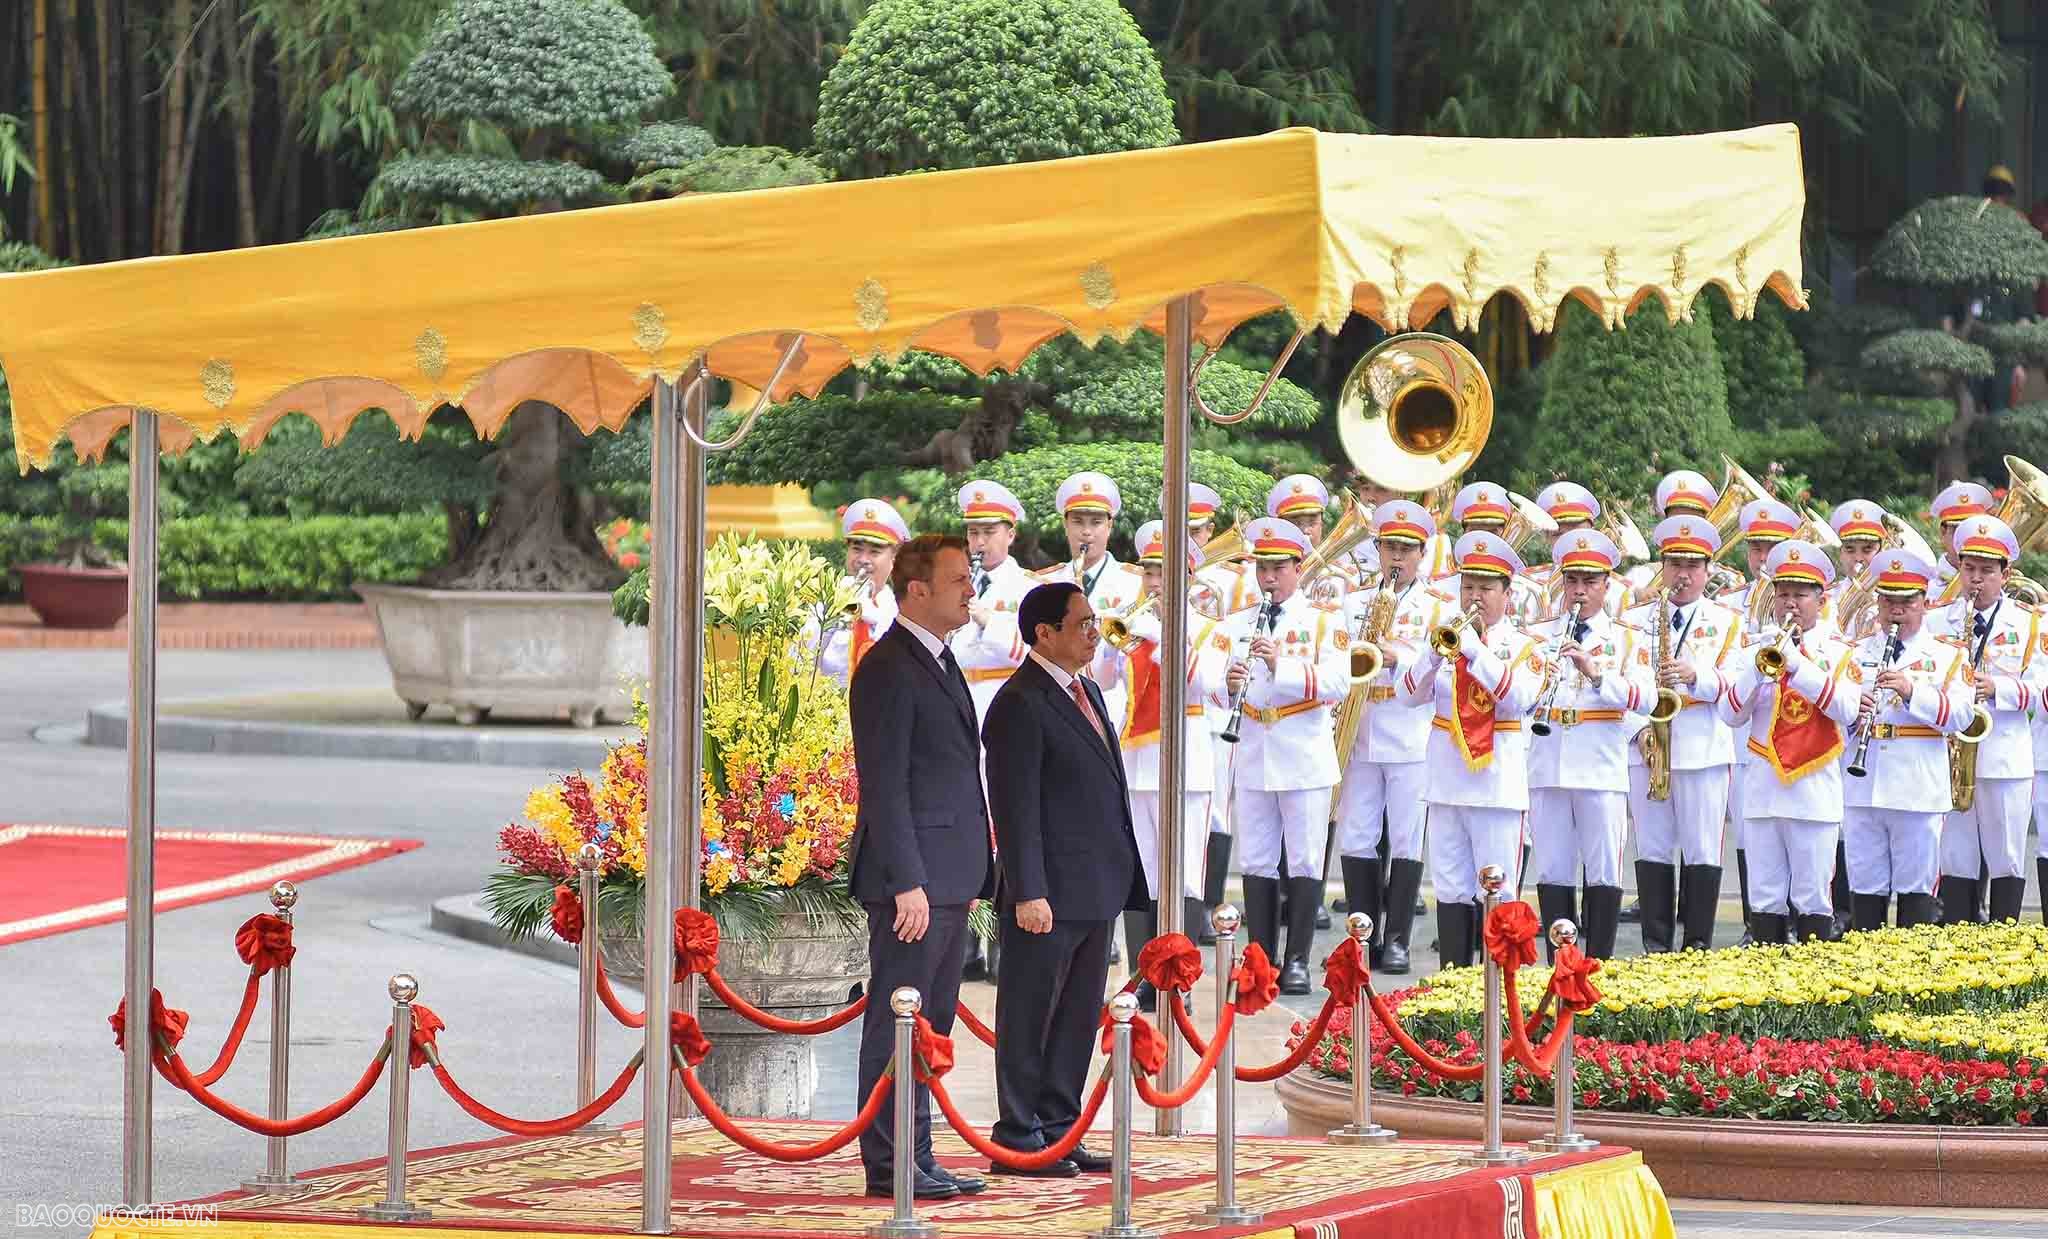 PM Pham Minh Chinh hosts welcome ceremony for Luxembourg’s PM Xavier Bettel